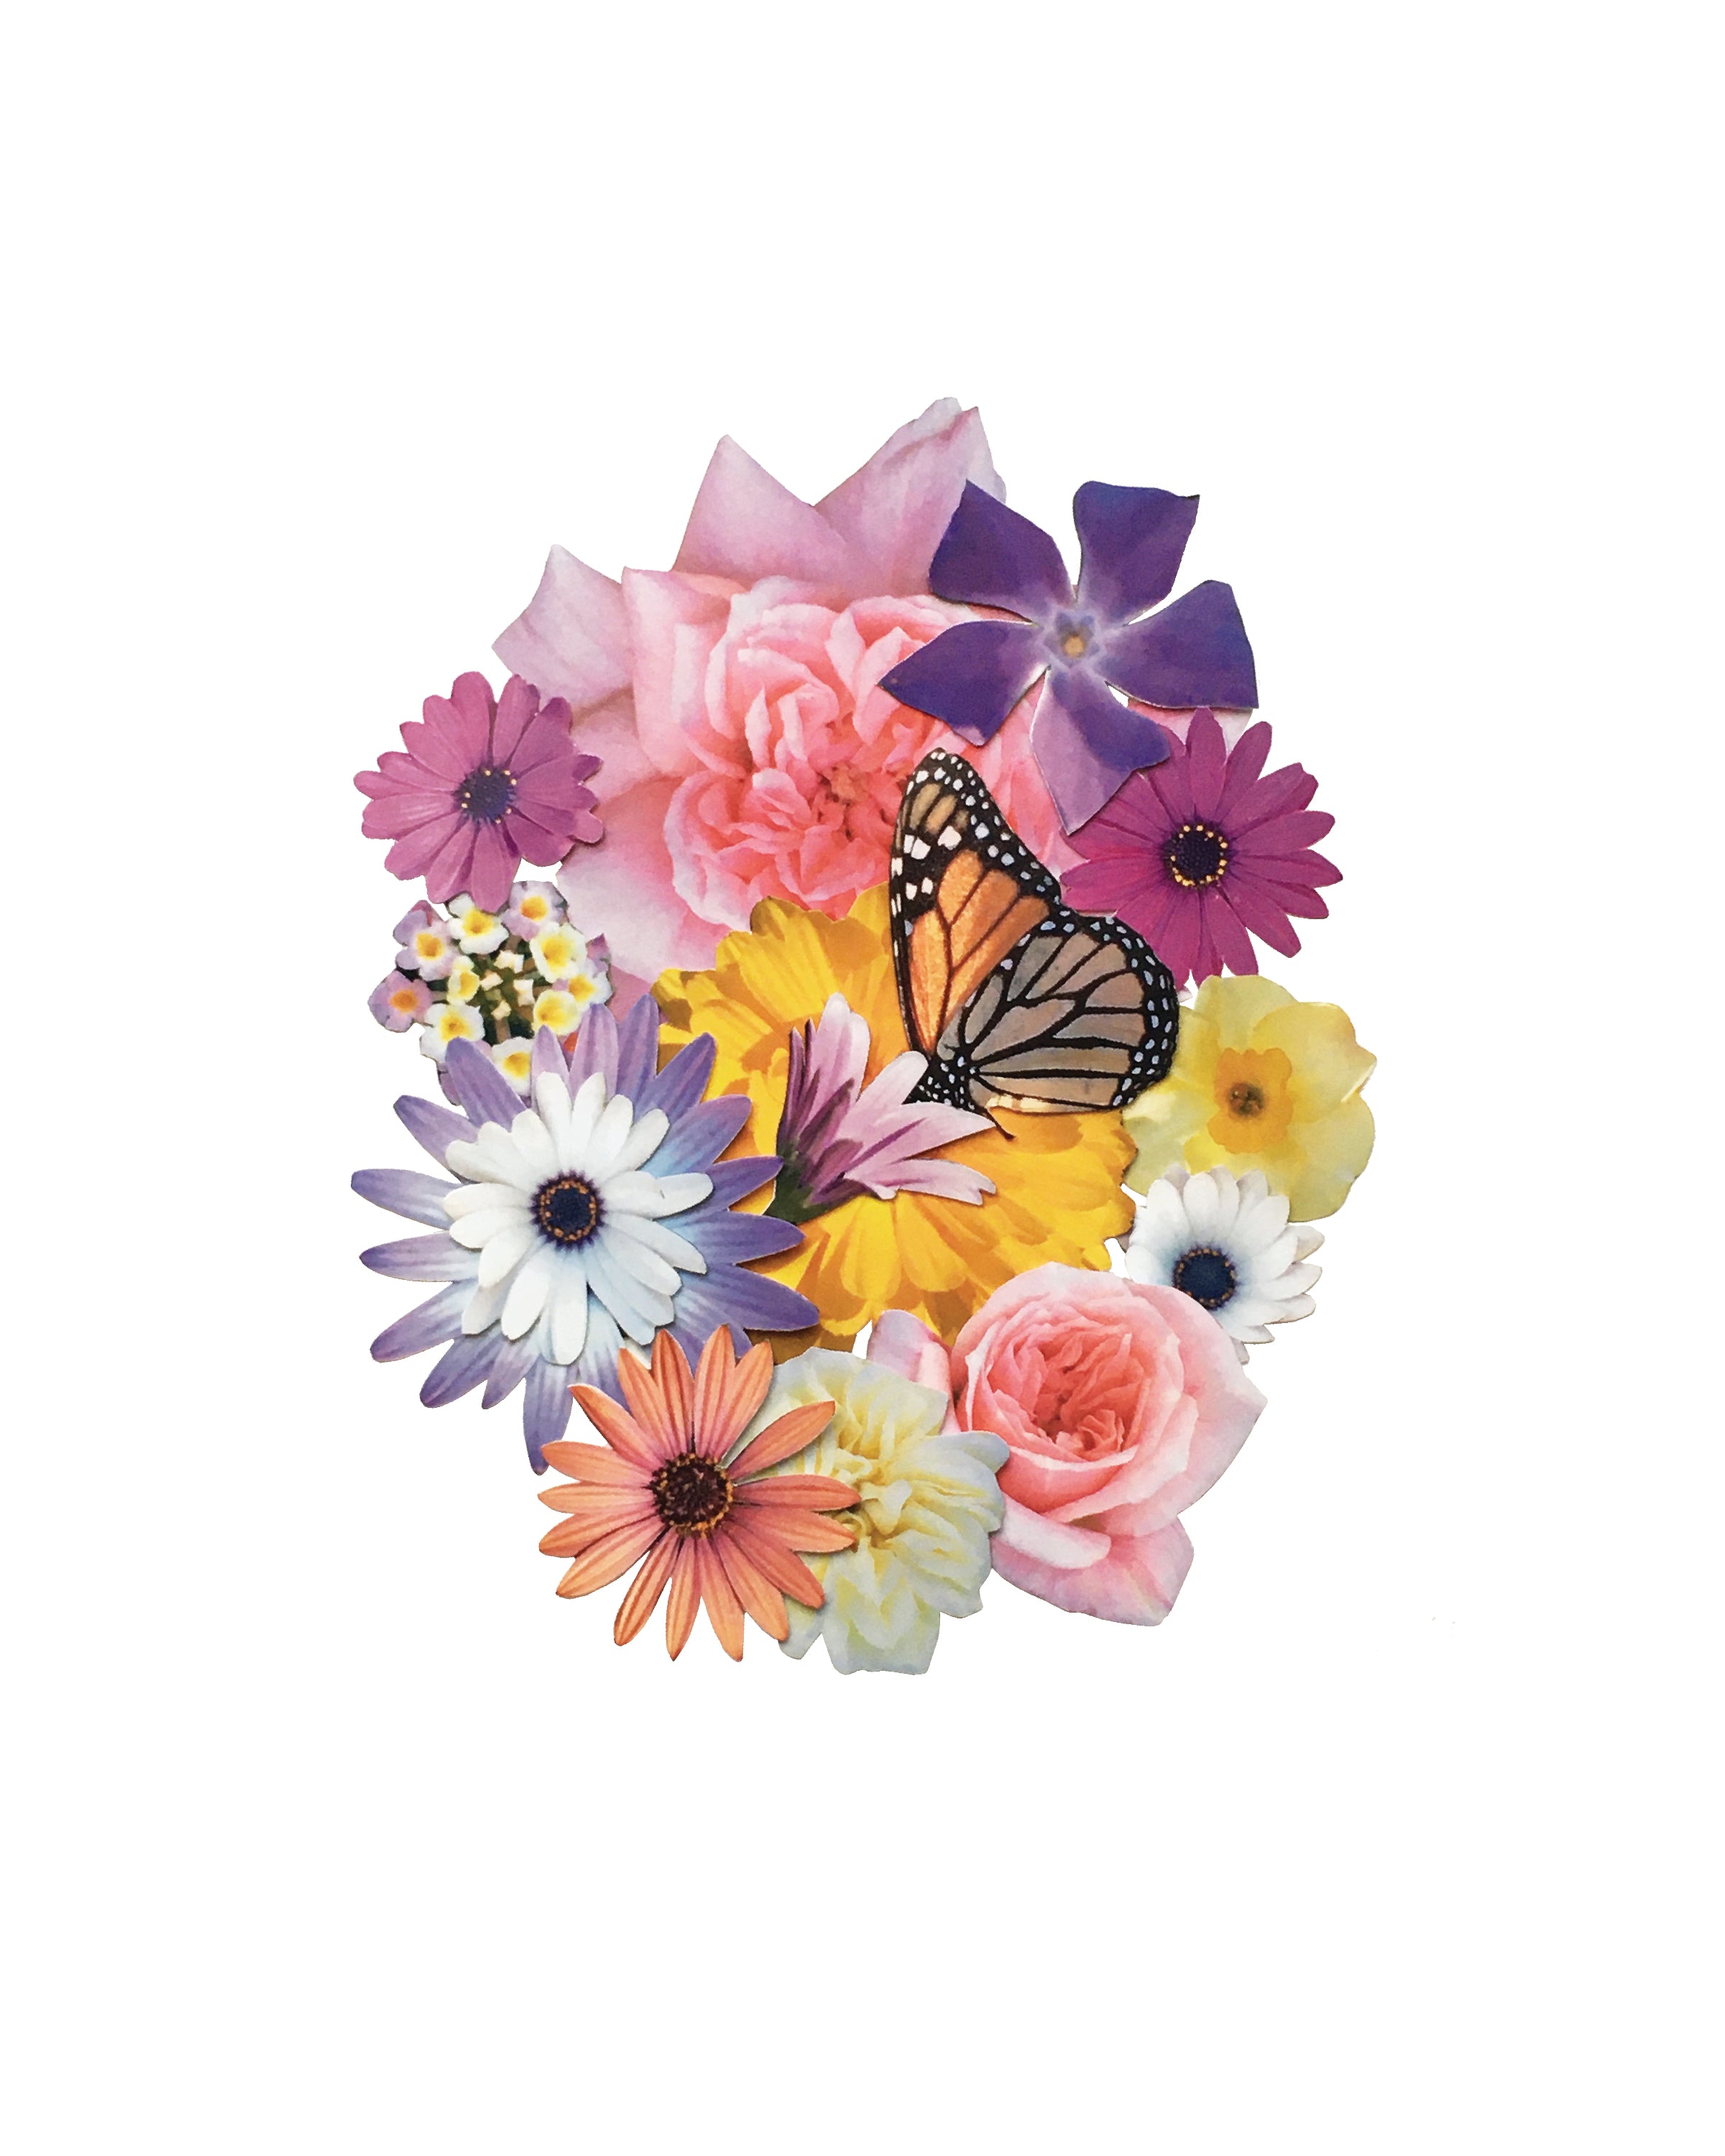 Butterfly Floral Collage Print – Atiliay